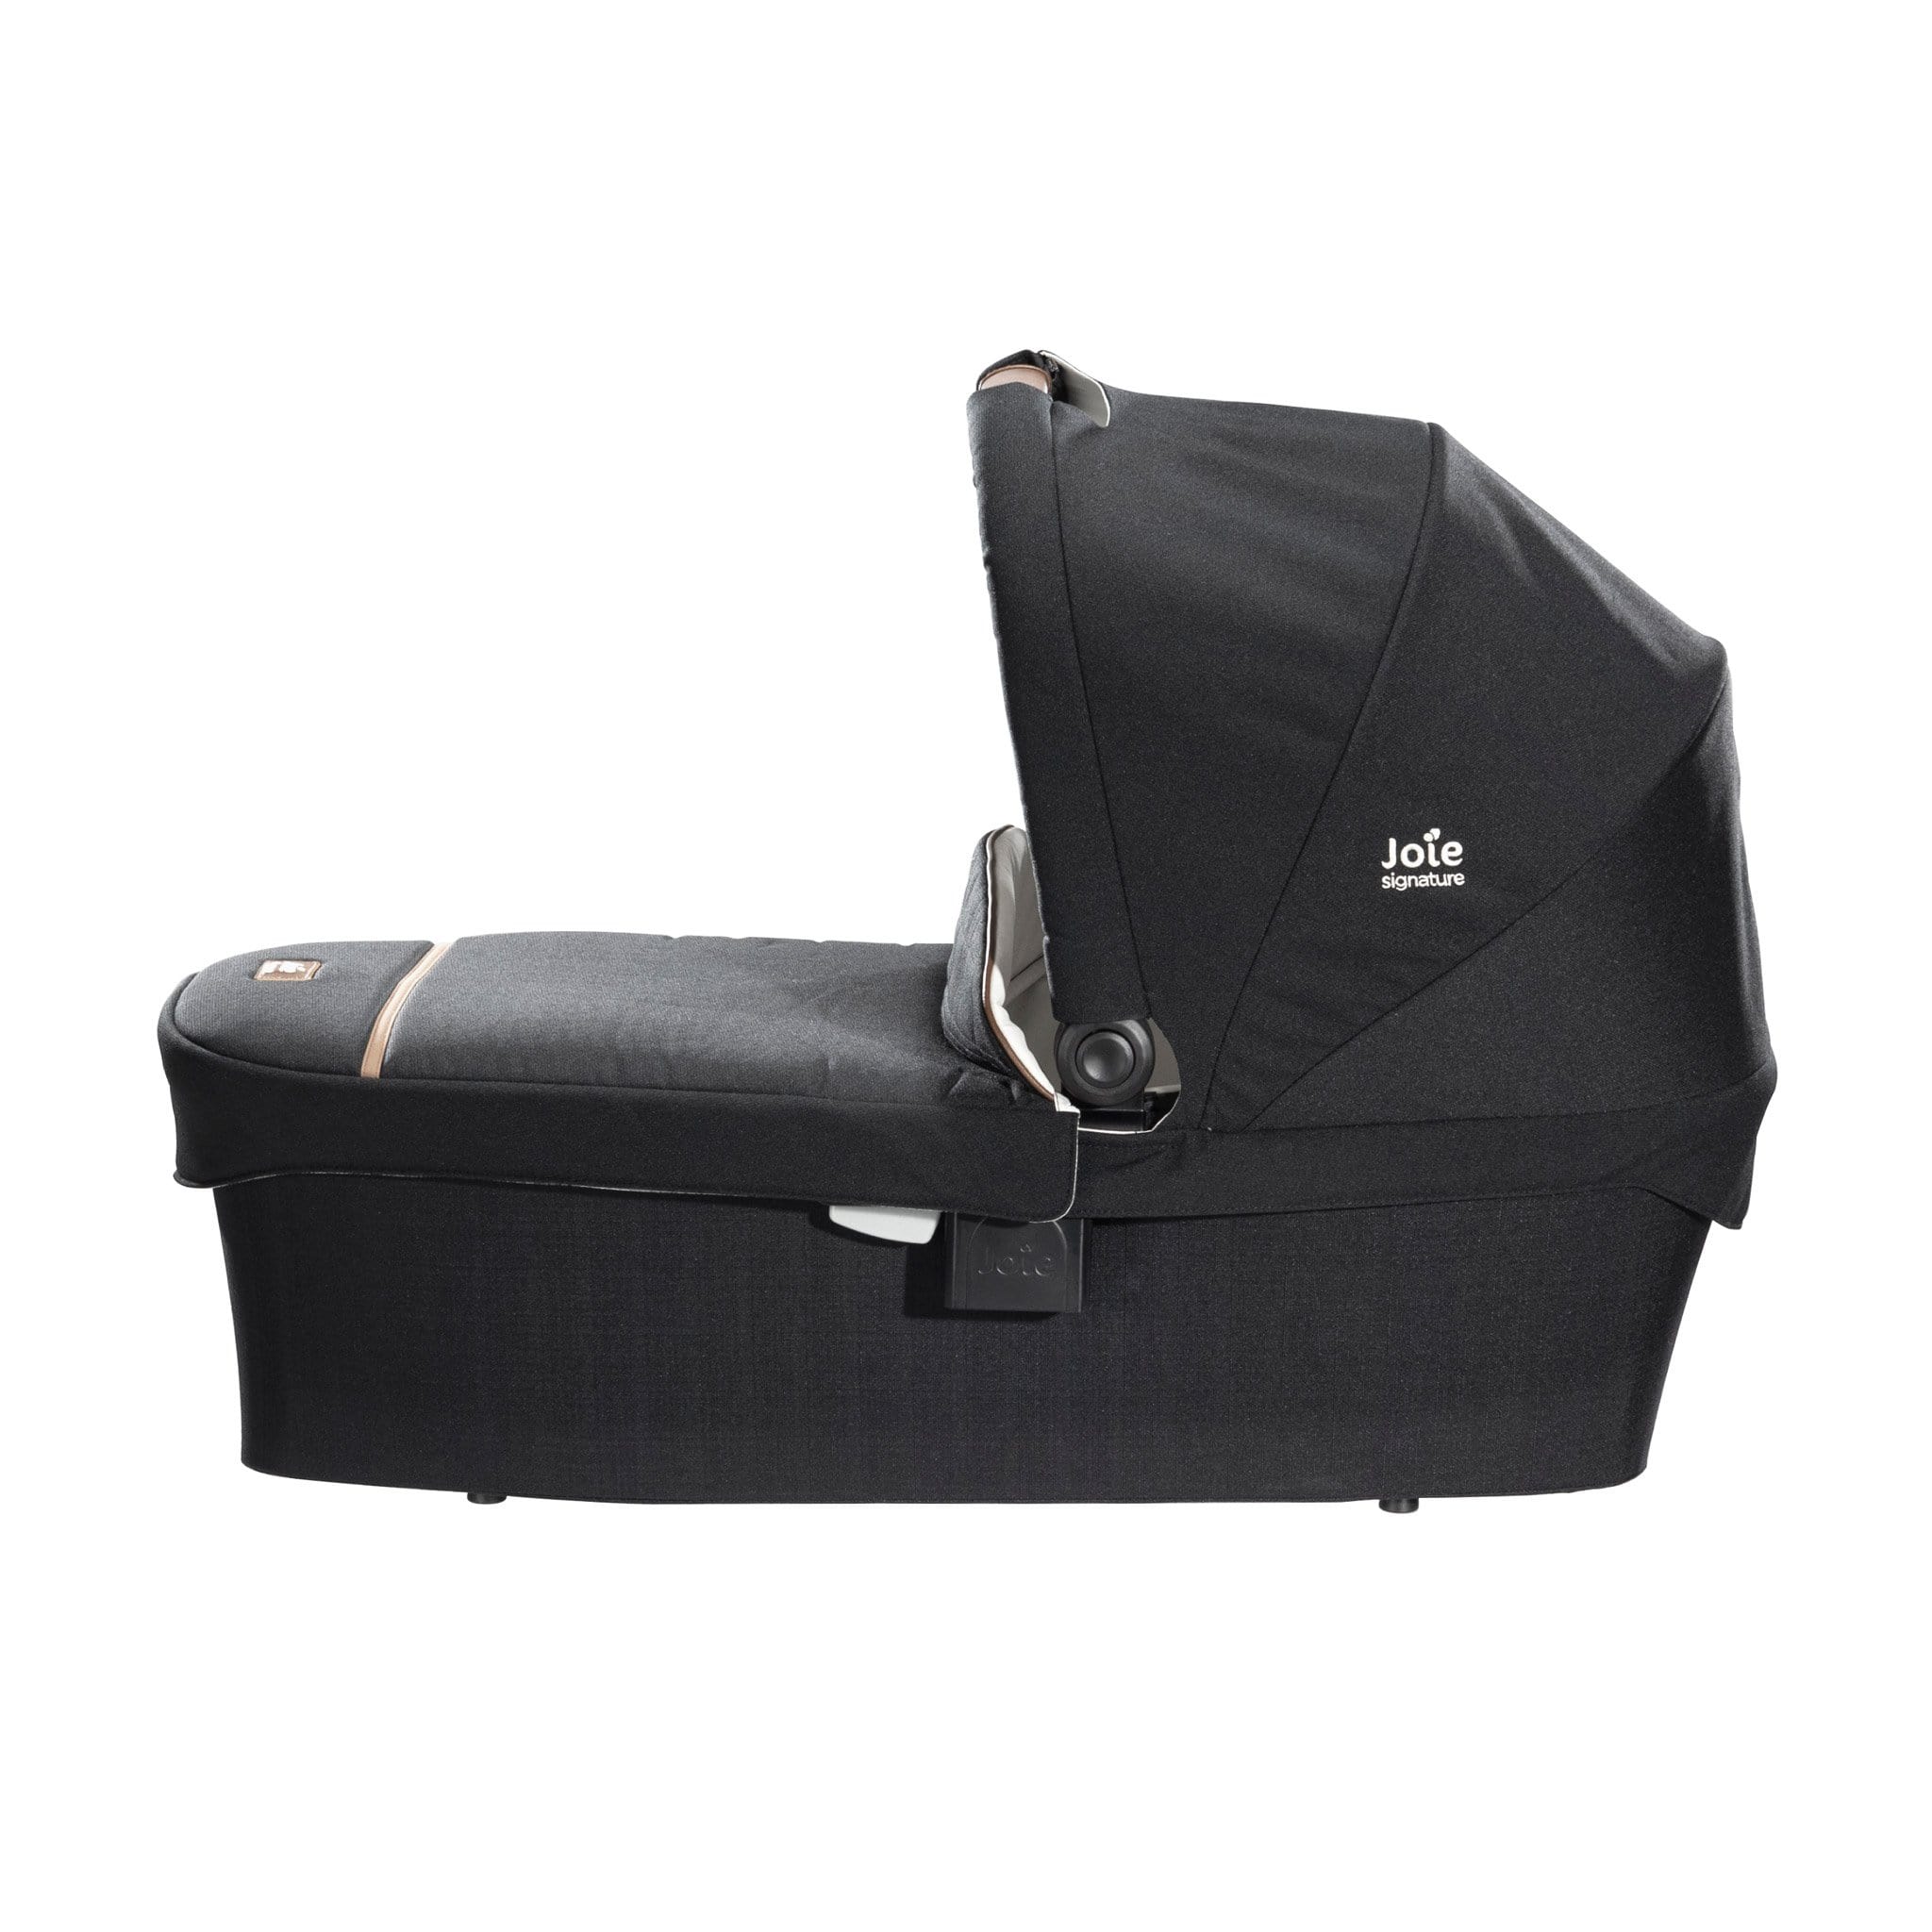 Joie Chassis & Carrycots Joie Ramble Signature Carrycot Eclipse A1112PBECL000